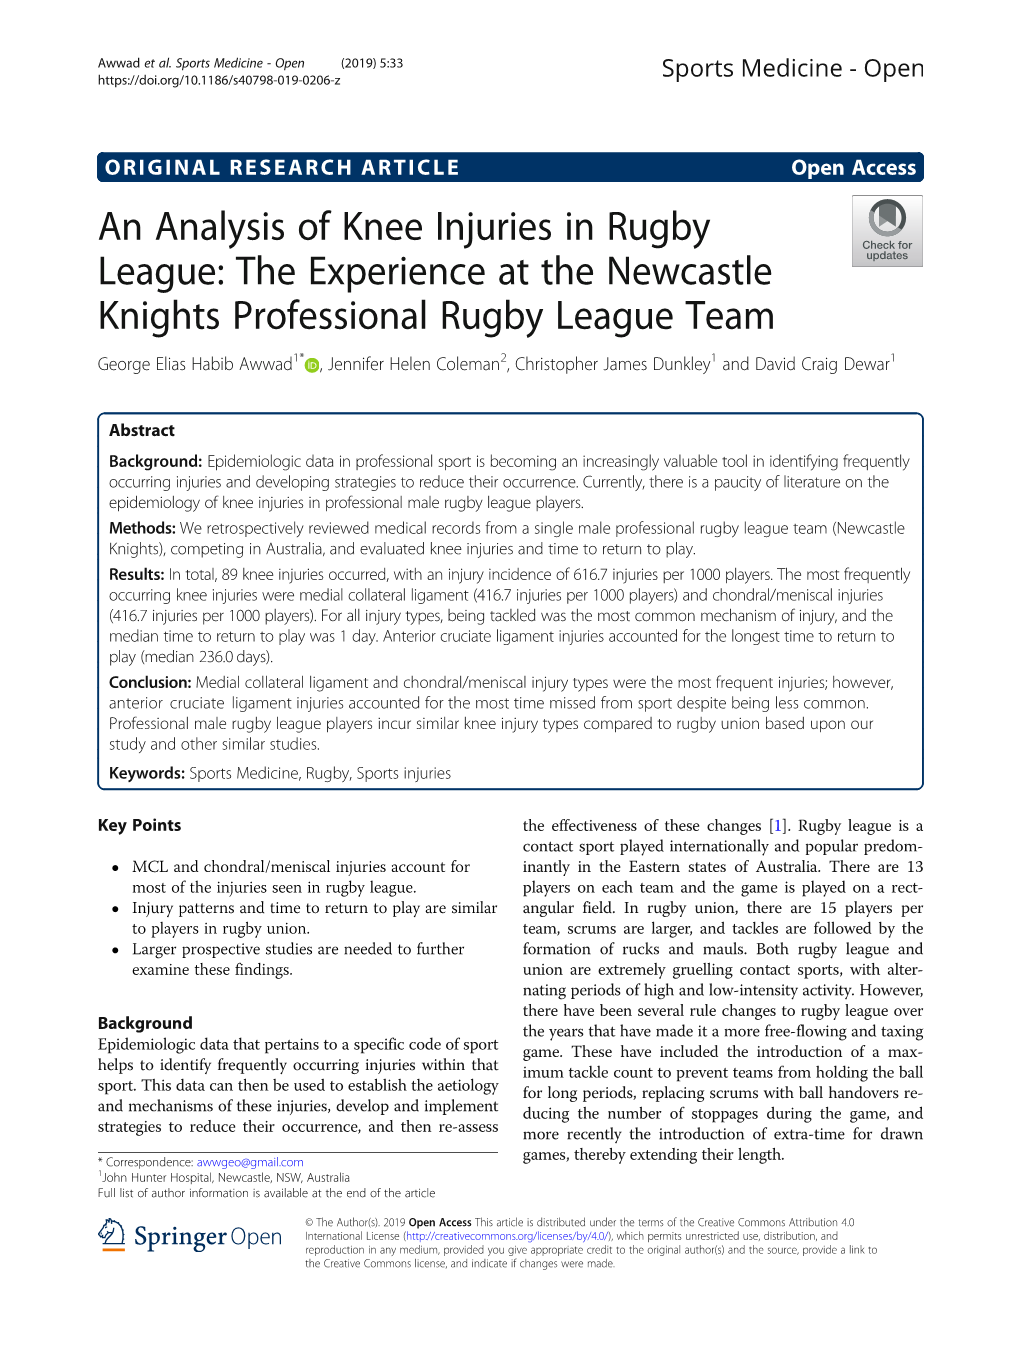 An Analysis of Knee Injuries in Rugby League